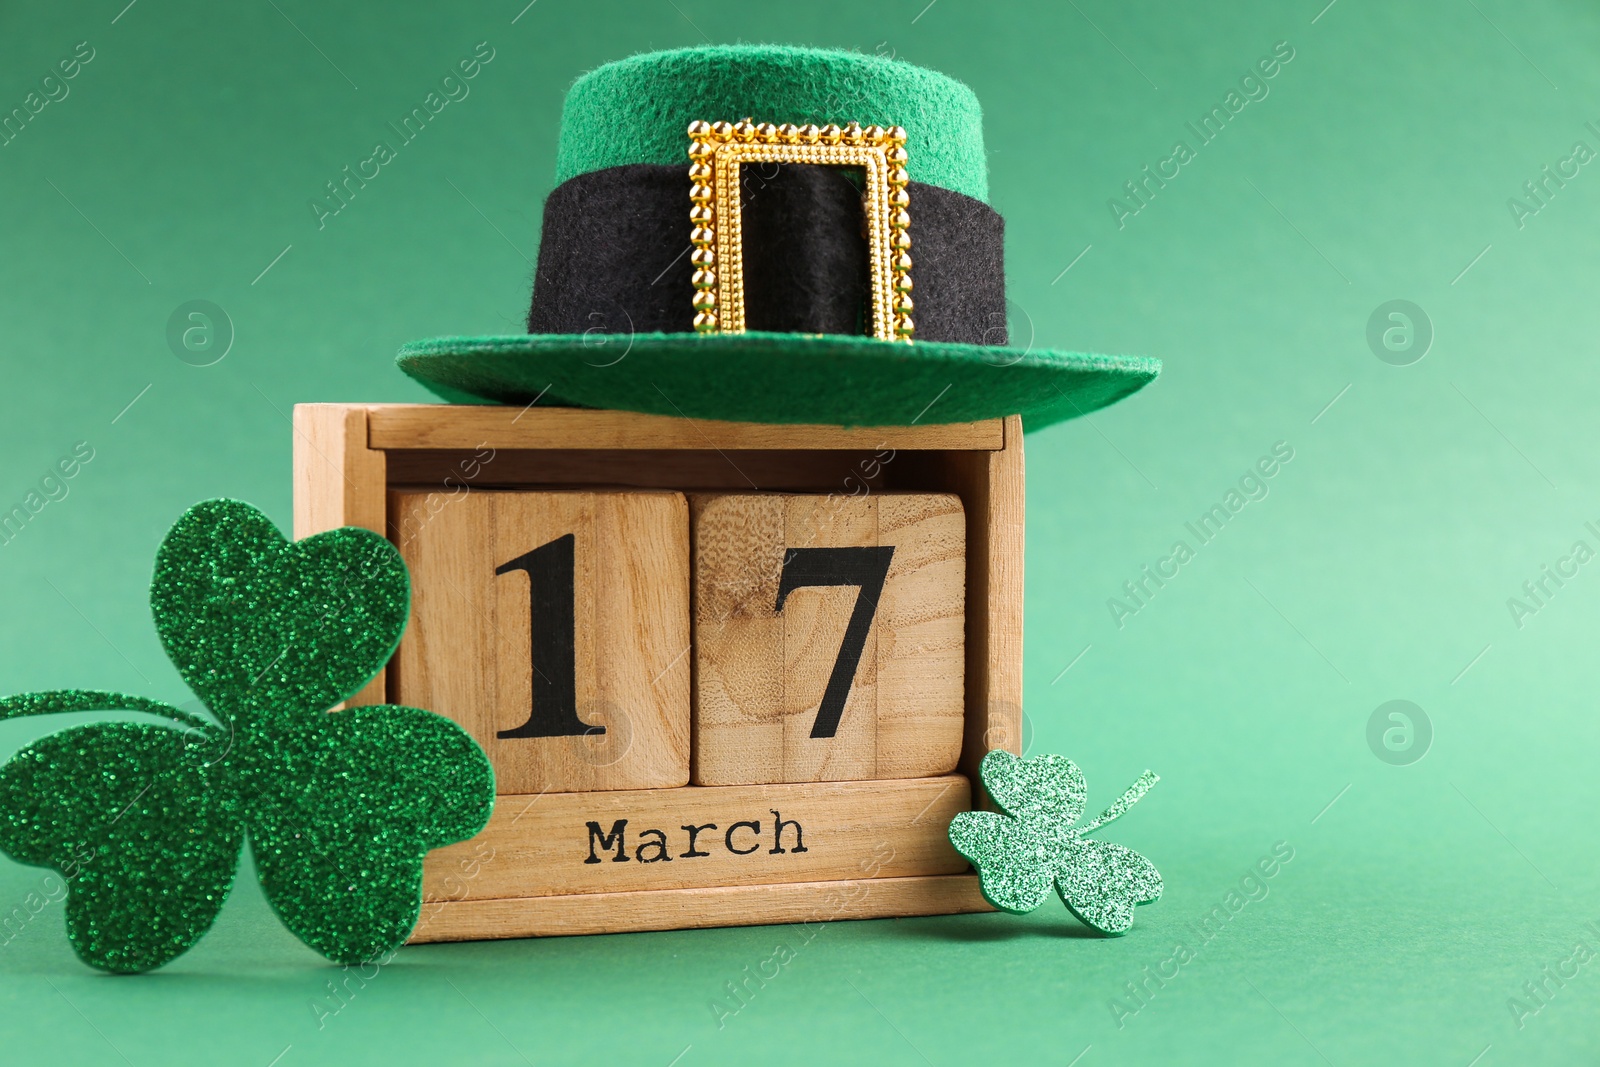 Photo of St. Patrick's day - 17th of March. Wooden block calendar, leprechaun hat and decorative clover leaves on green background